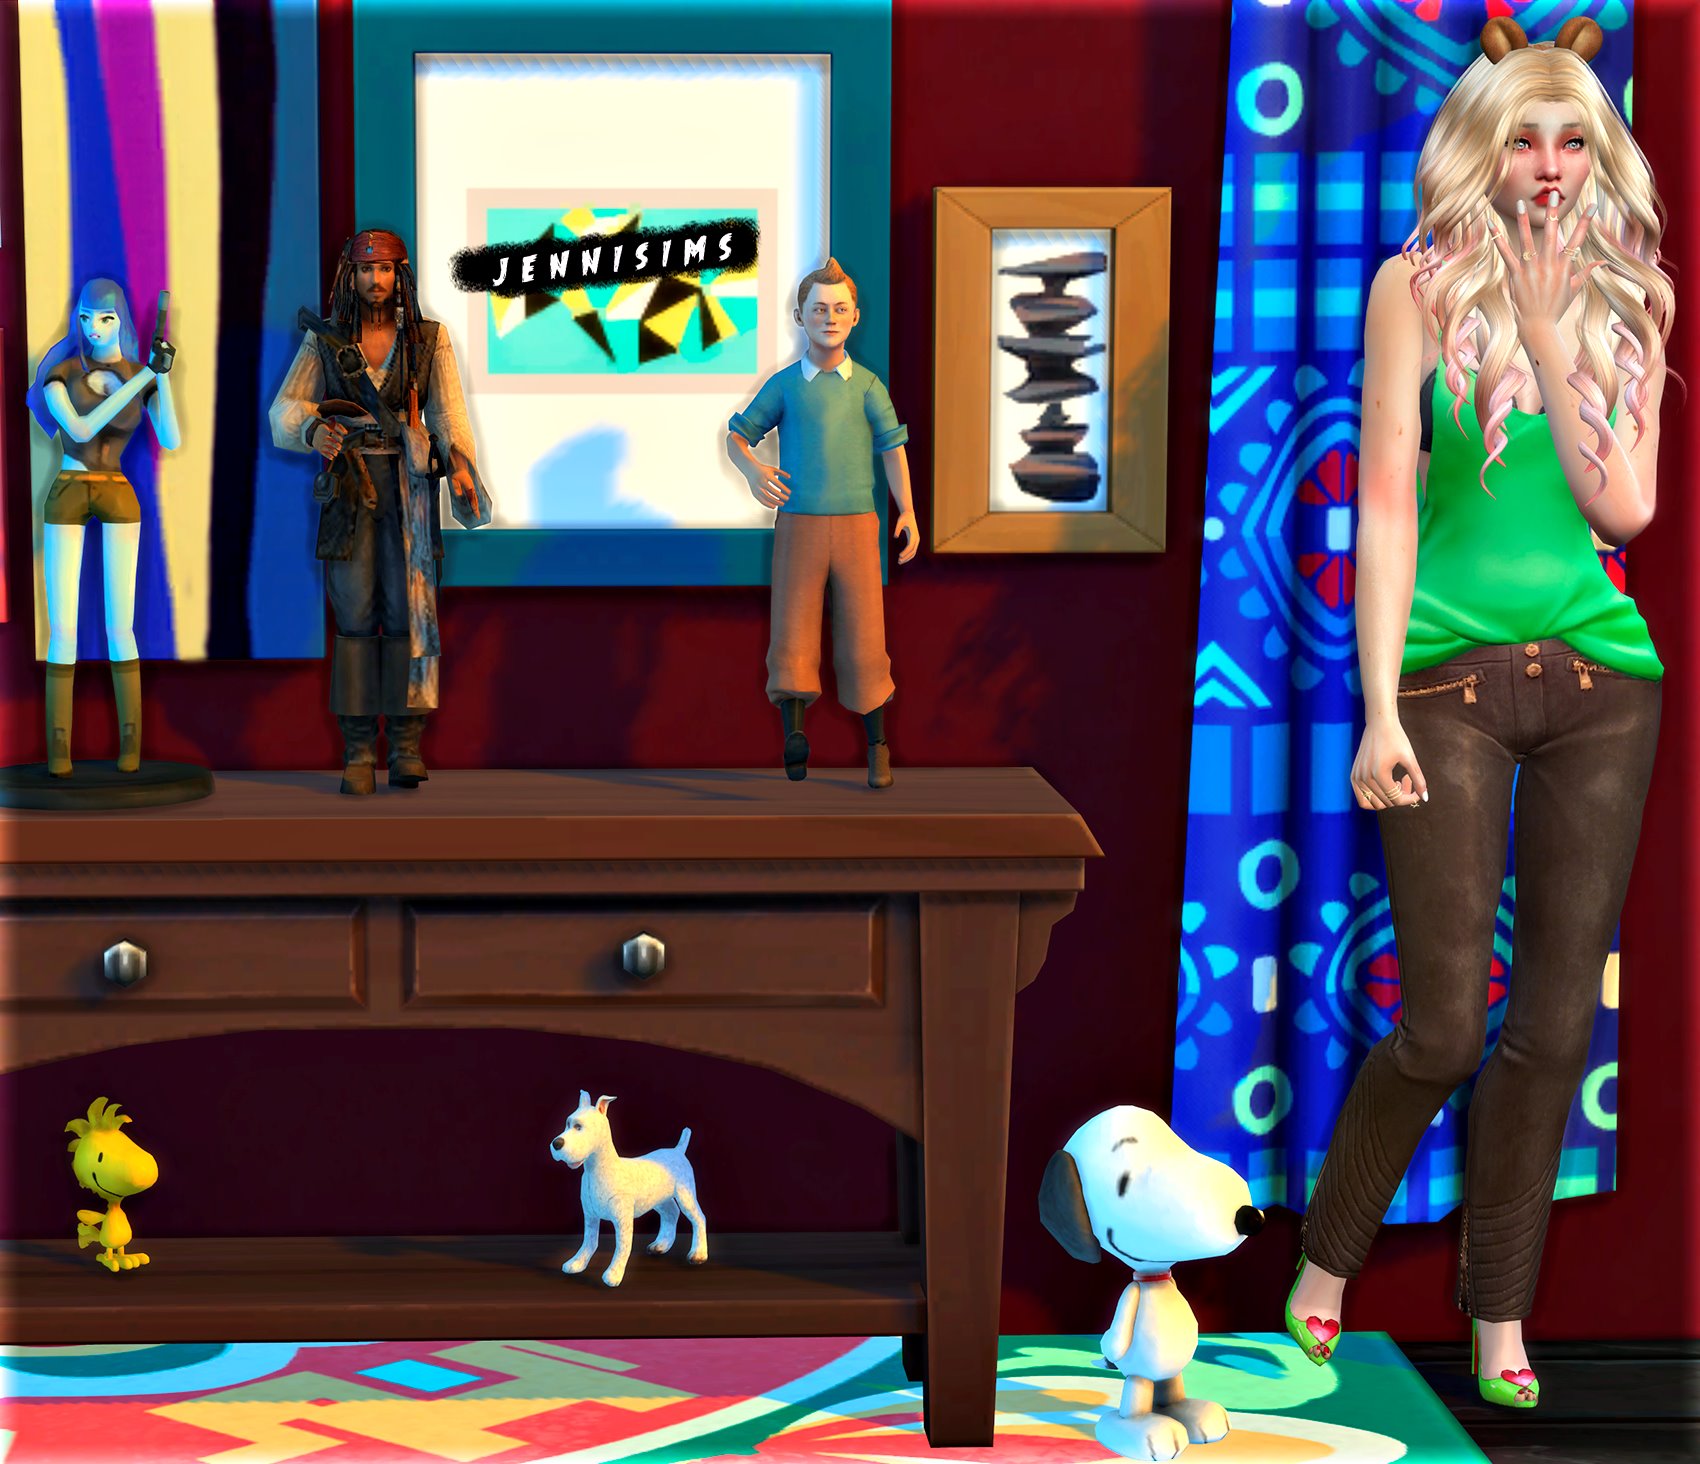 Sims 4 sim downloads » Sims 4 Updates » Page 2 of 9